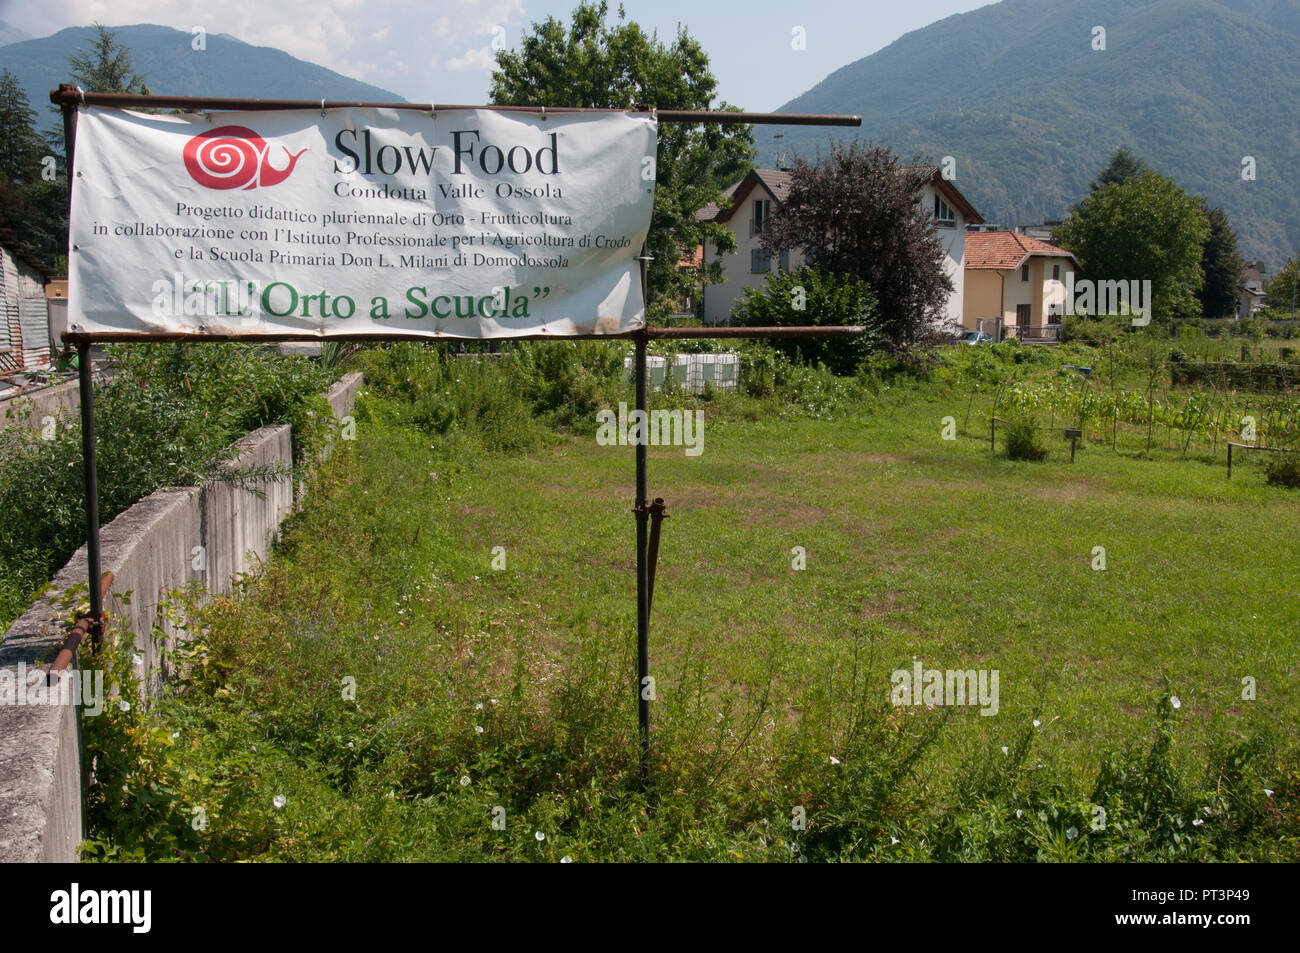 Slow Food agricultural education project near Domodossola, Piedmont, Italy Stock Photo